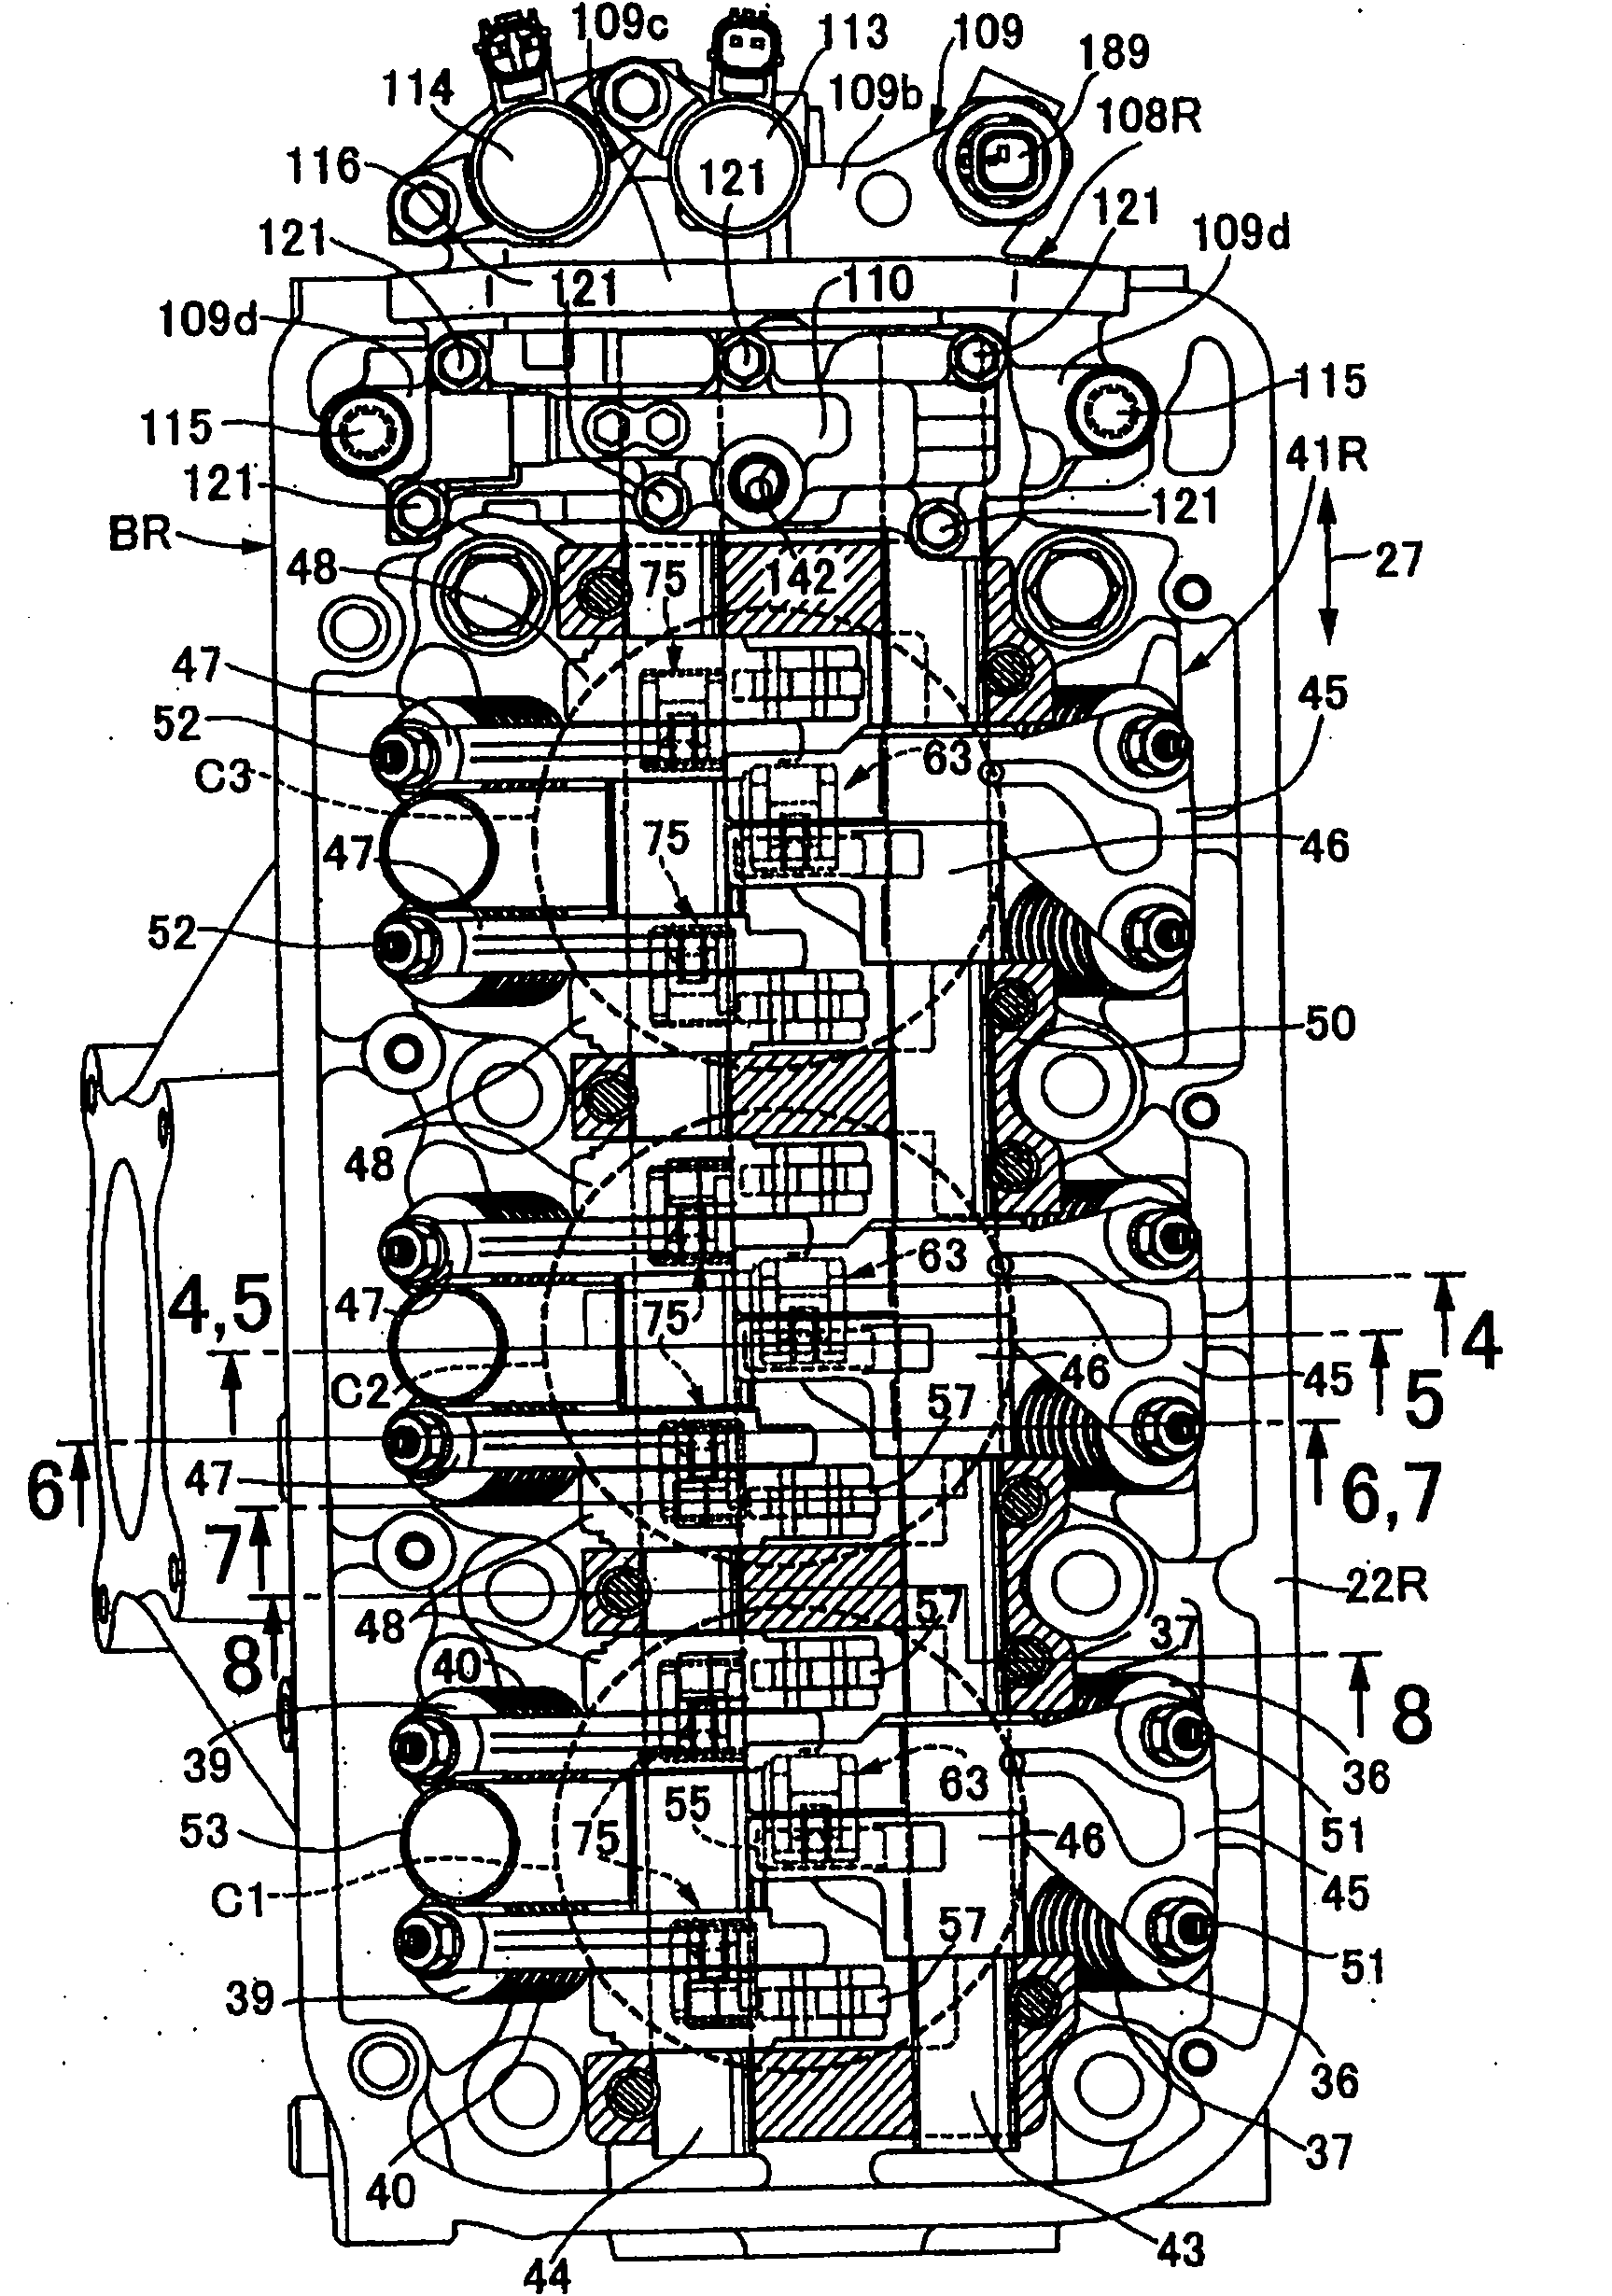 Valve gear control device for internal combustion engine